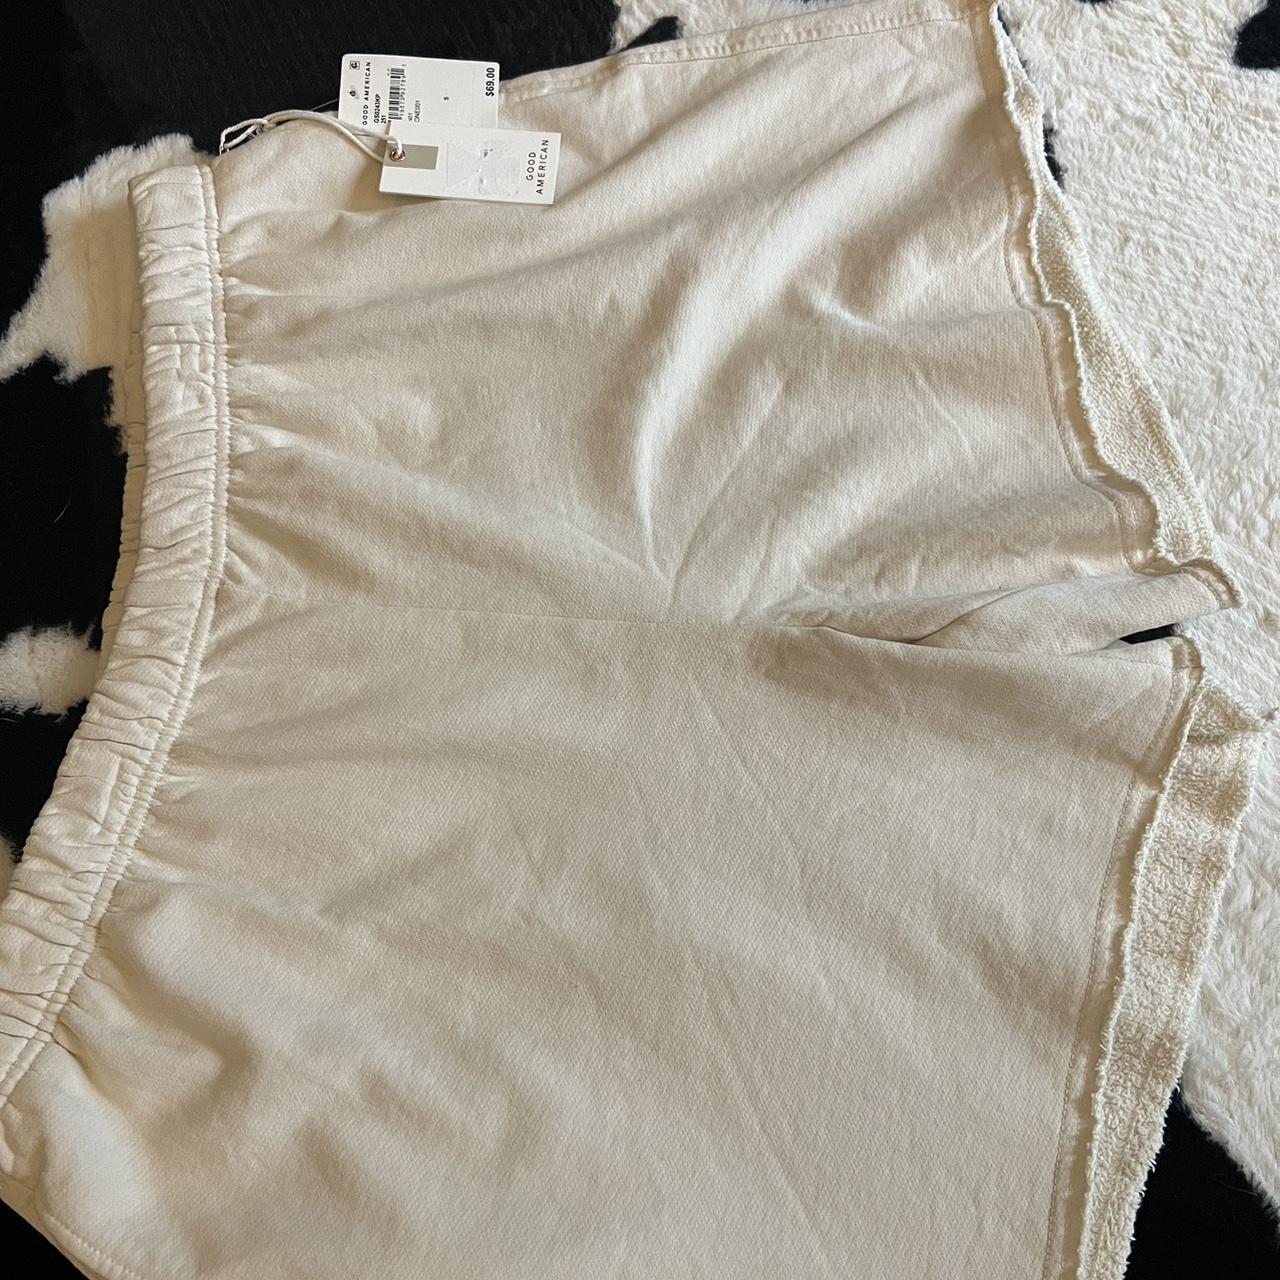 Good American Shorts Size 5 (I’m a size 12 in jeans... - Depop